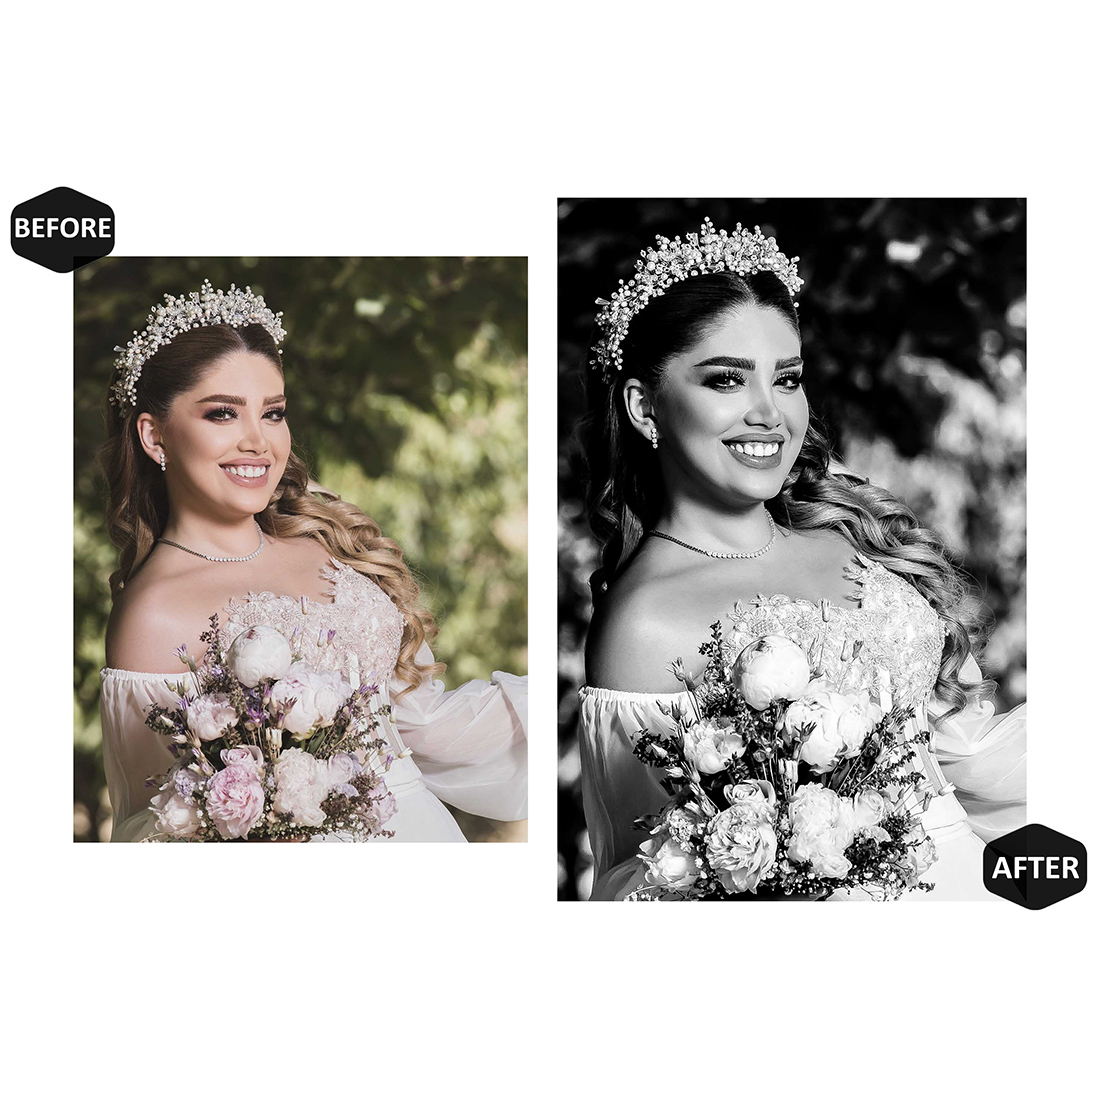 12 Photoshop Actions, Monochrome Wedding Ps Action, Black And White ACR Preset, Romantic Ps Filter, Portrait And Lifestyle Theme For Instagram, Blogger preview image.